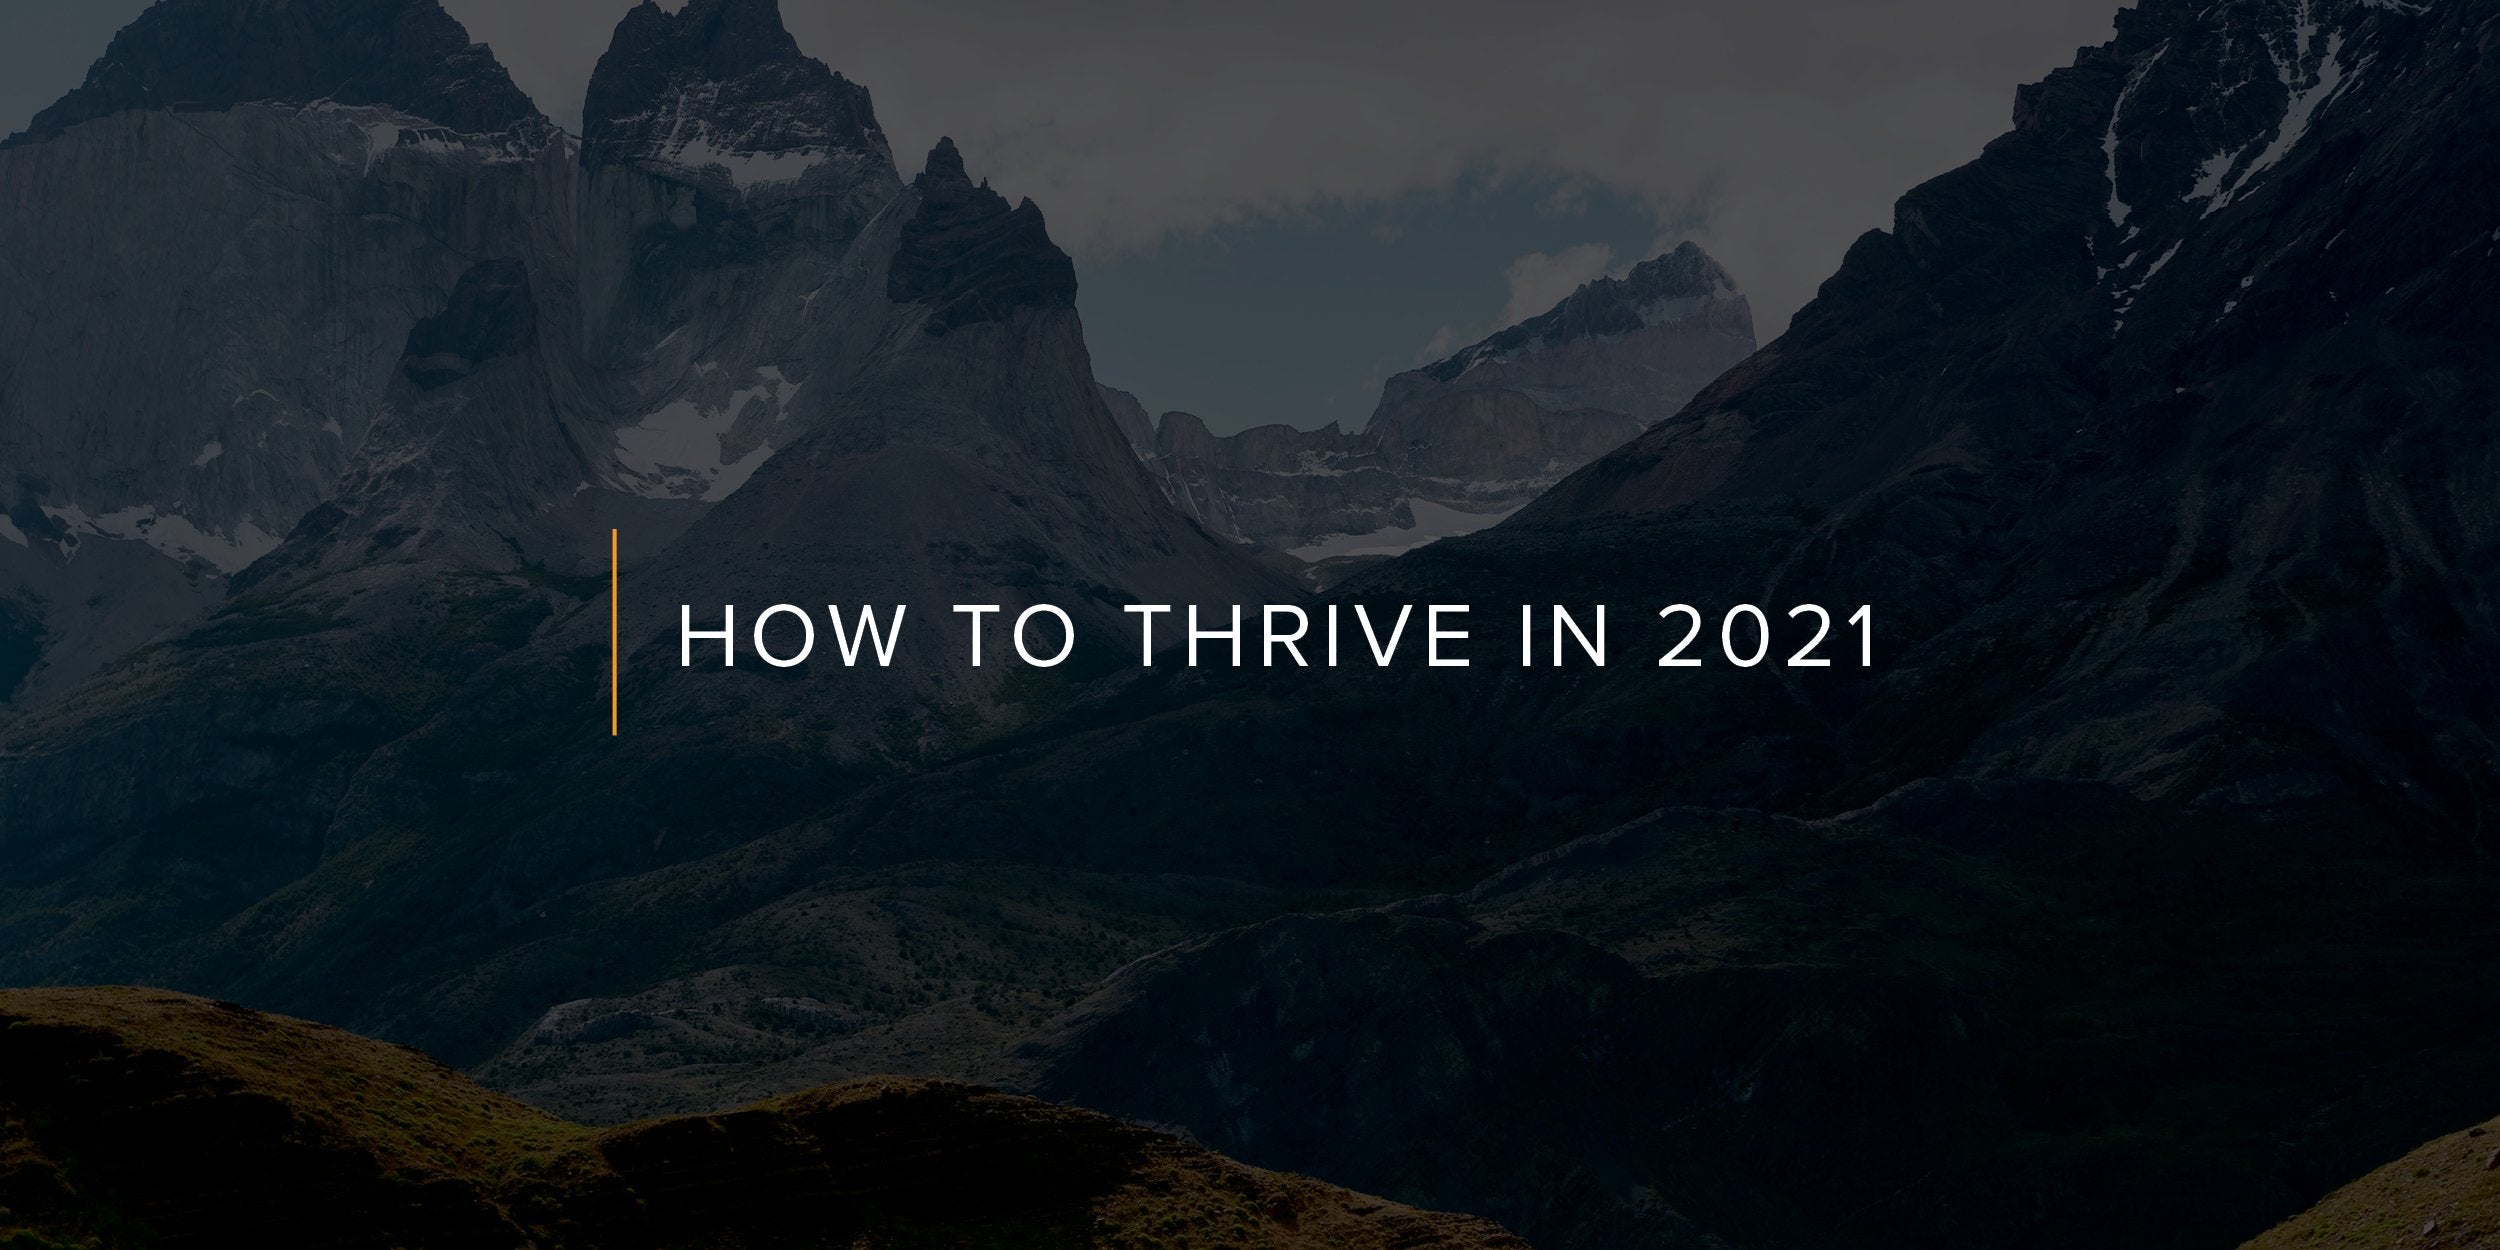 How to Thrive in 2021